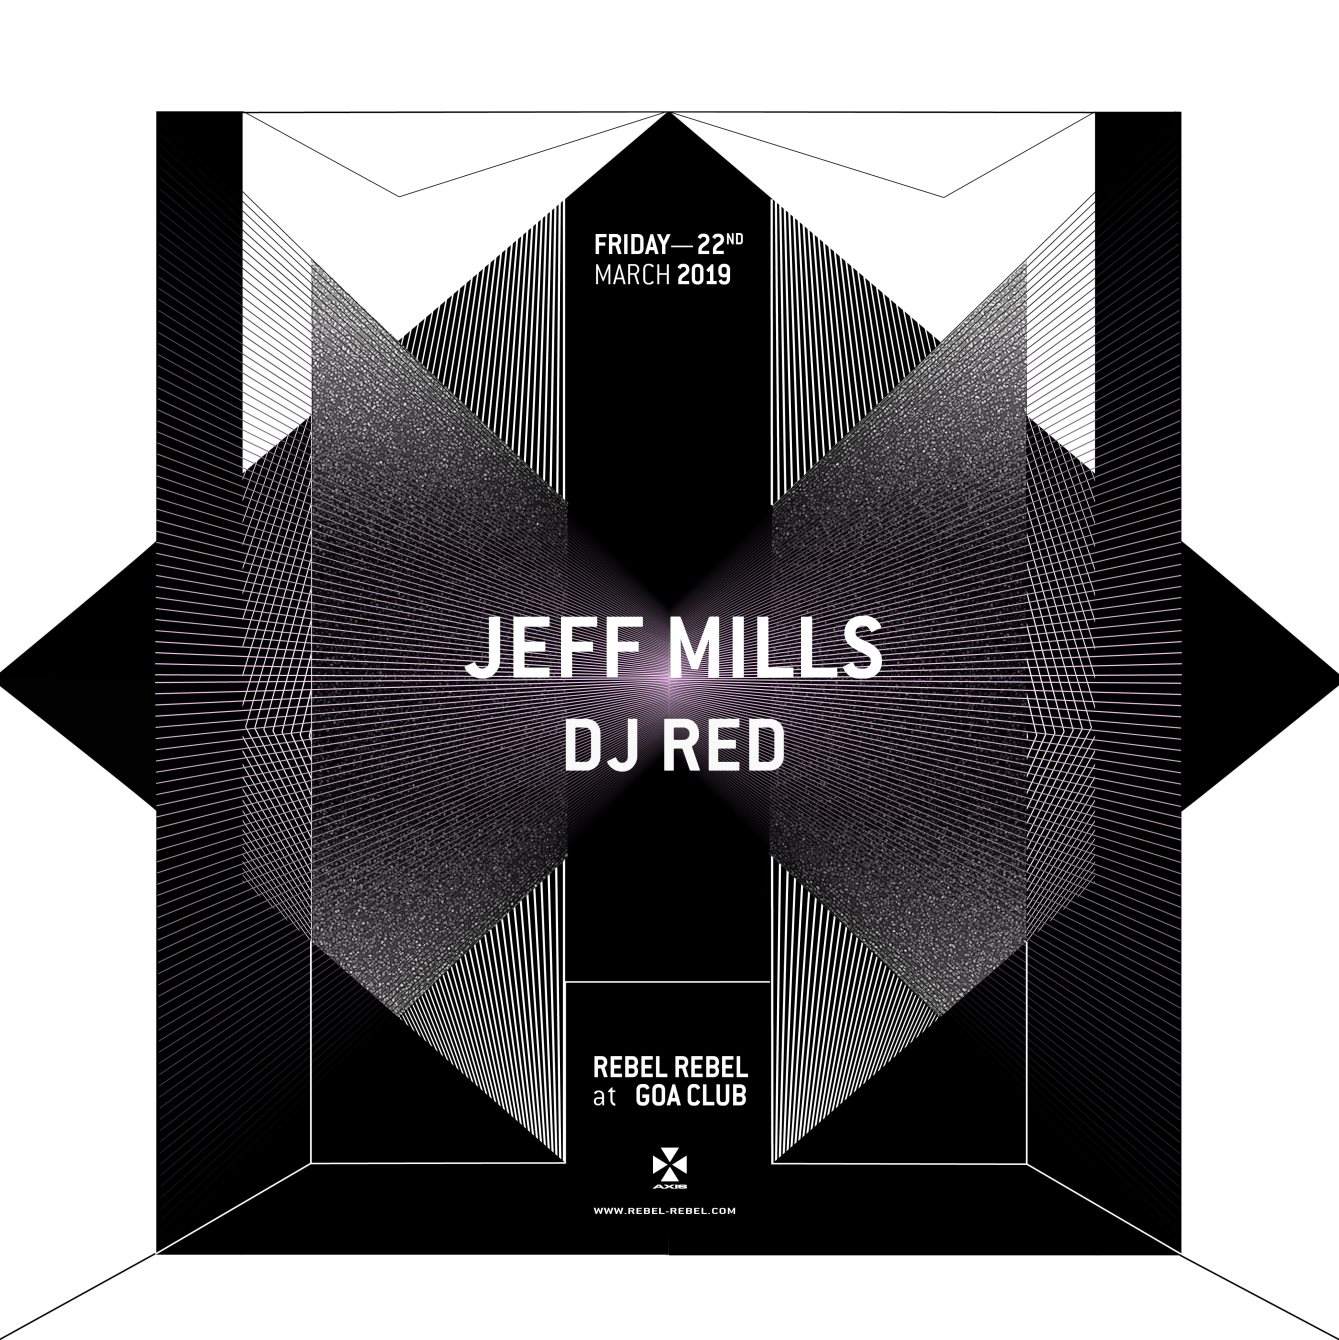 RR — with Jeff Mills - フライヤー裏